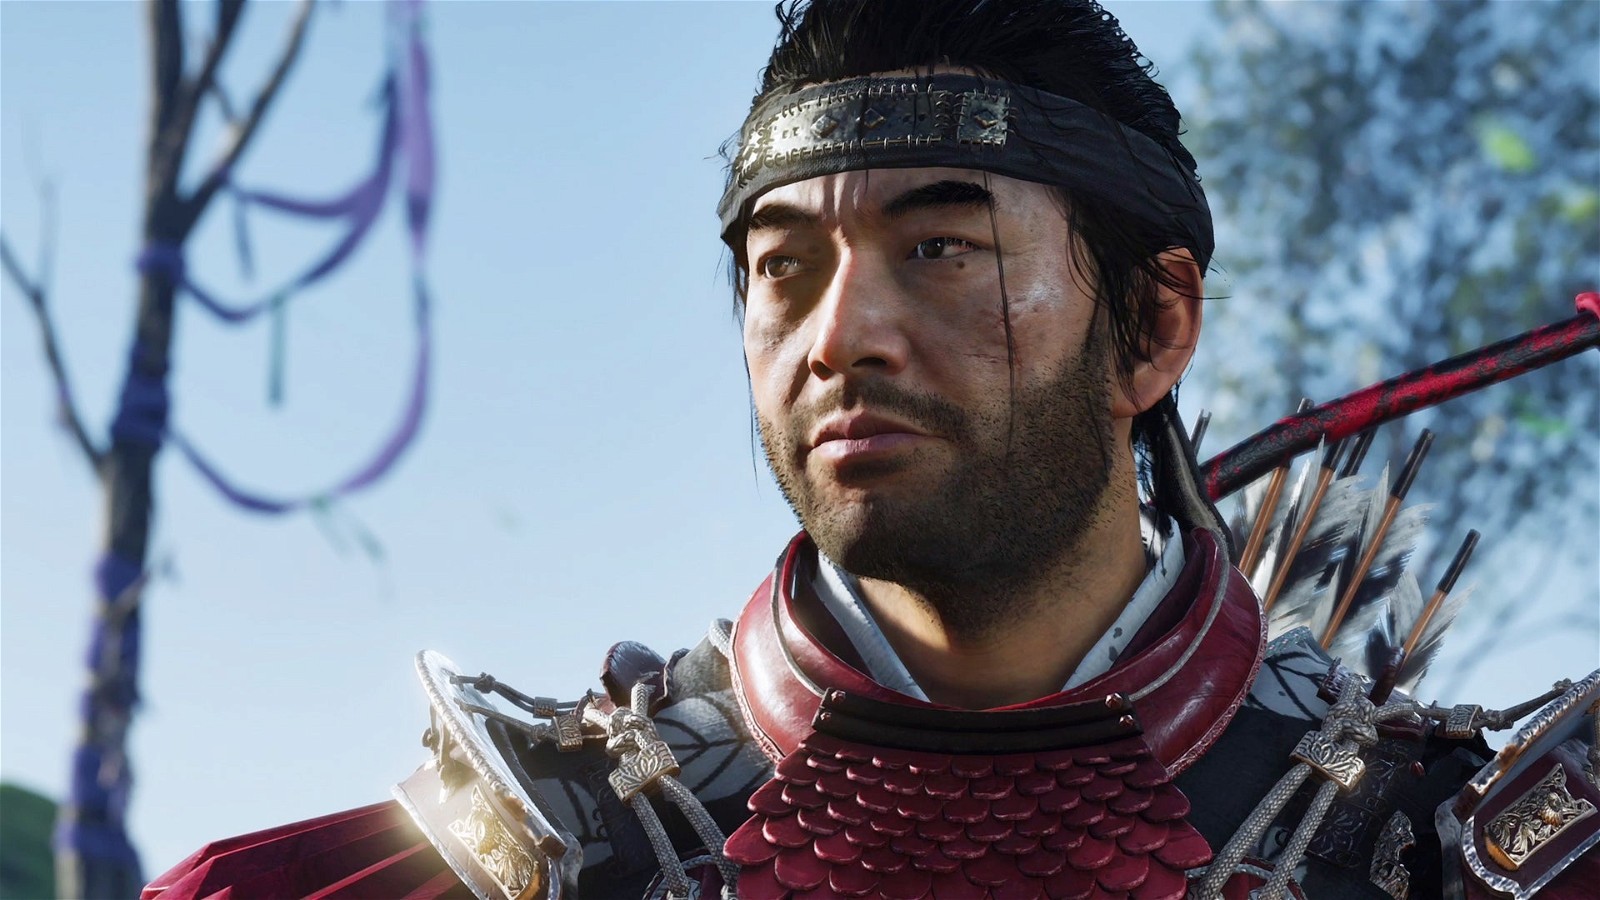 Ghost of Tsushima was a commercial success